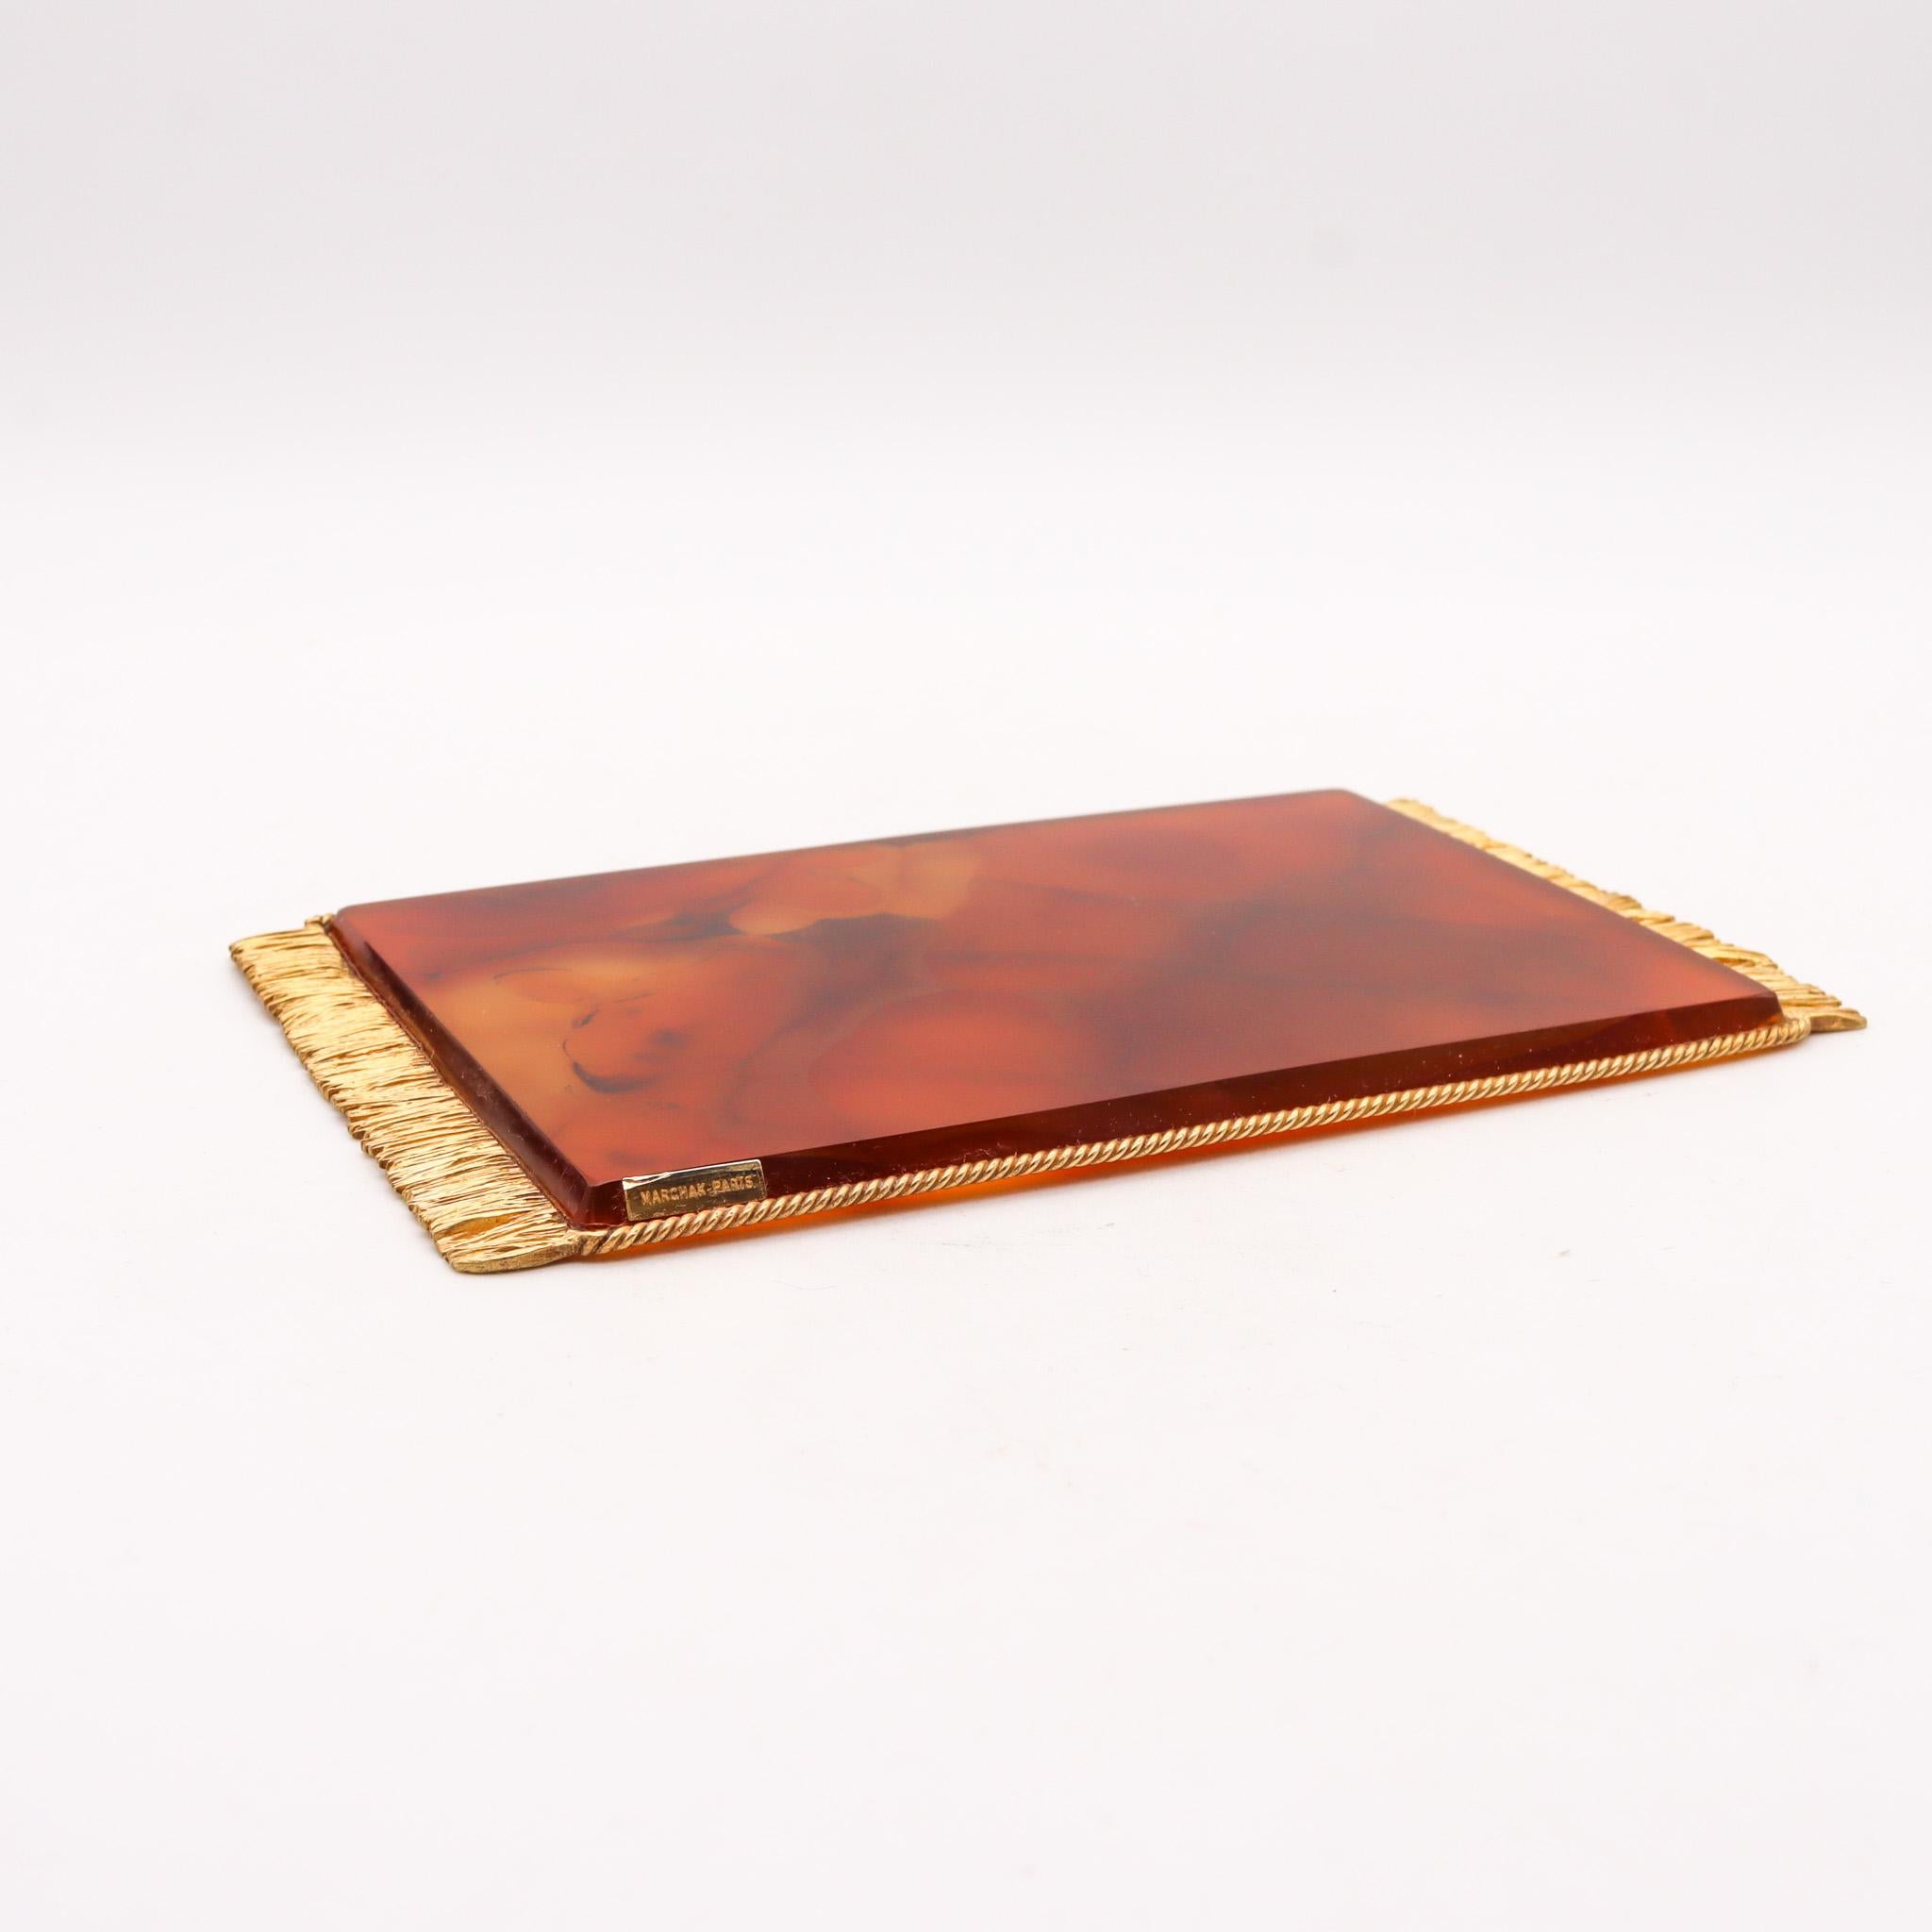 Desk tray designed by Marchak Paris.

An unusual and very rare desk tray, created in Paris France by the luxury house of Marchak during the art deco period, back in the early 1920. This beautiful tray has been crafted in the shape of a rectangular